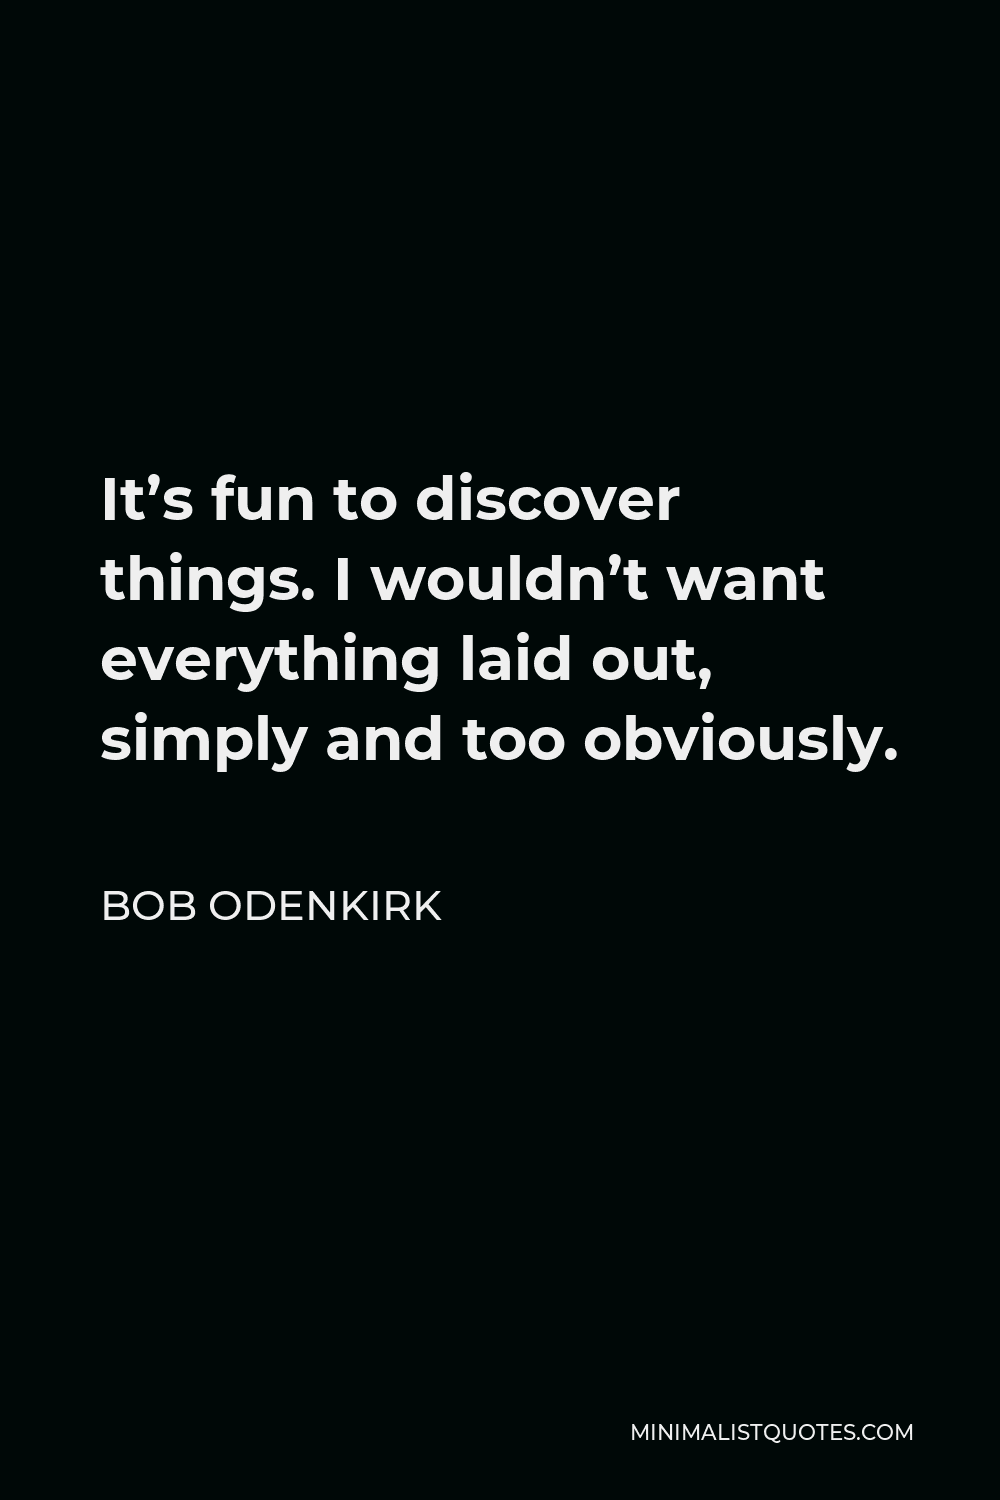 Bob Odenkirk Quote - It’s fun to discover things. I wouldn’t want everything laid out, simply and too obviously.